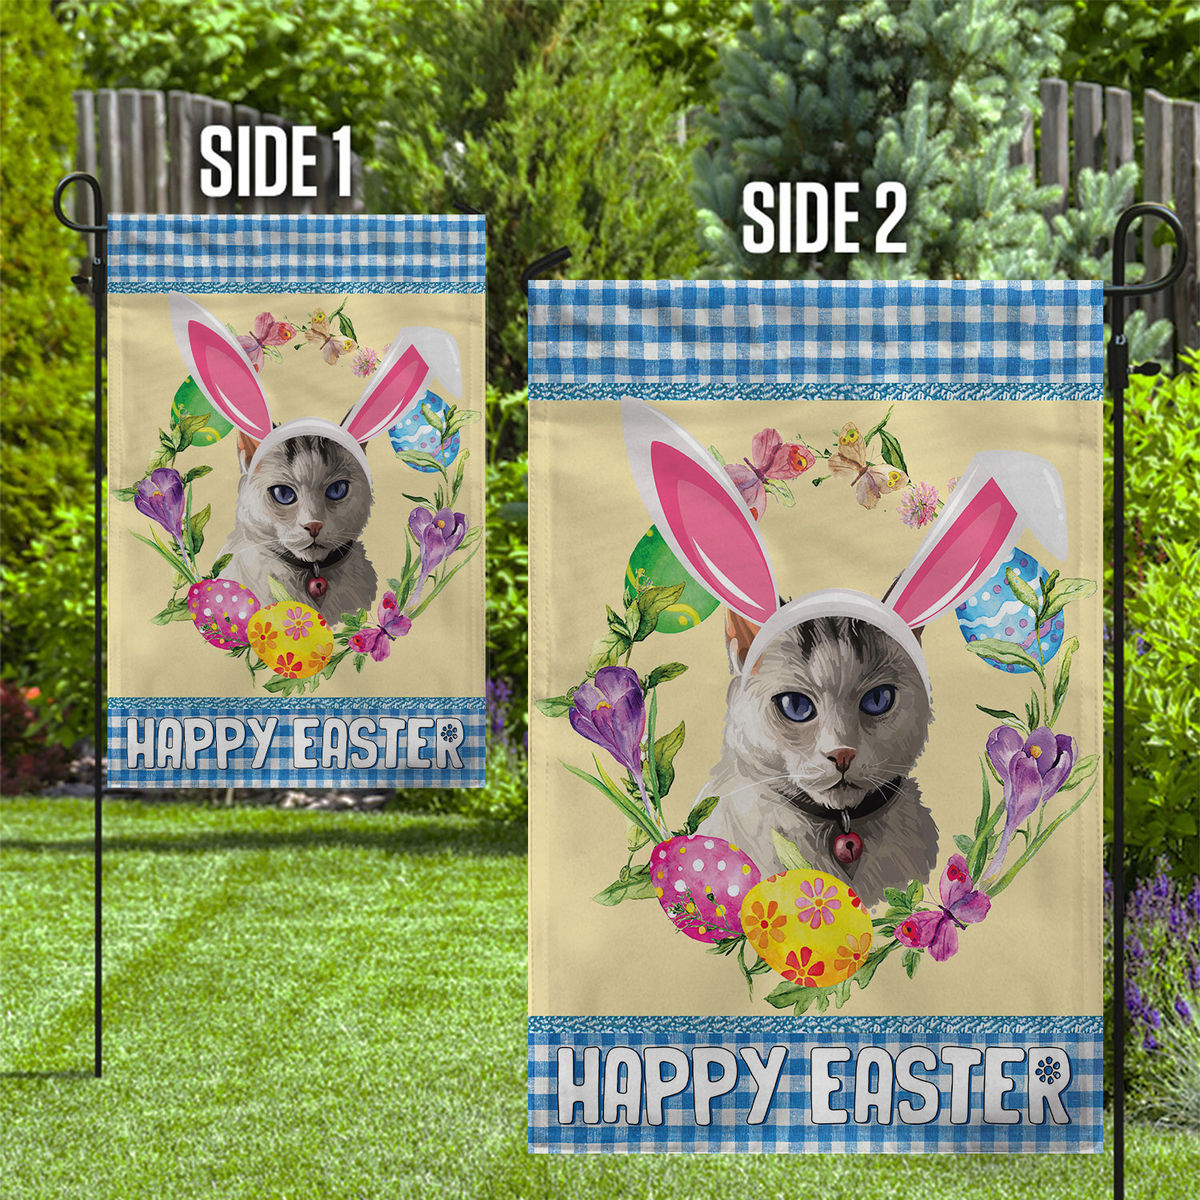 Happy Easter - Happy Easter Colorpoint Shorthair Cat Flag Colorpoint Shorthair Cat Bunny Easter Eggs Spring Garden Flag Easter Welcome Flag 24505_2